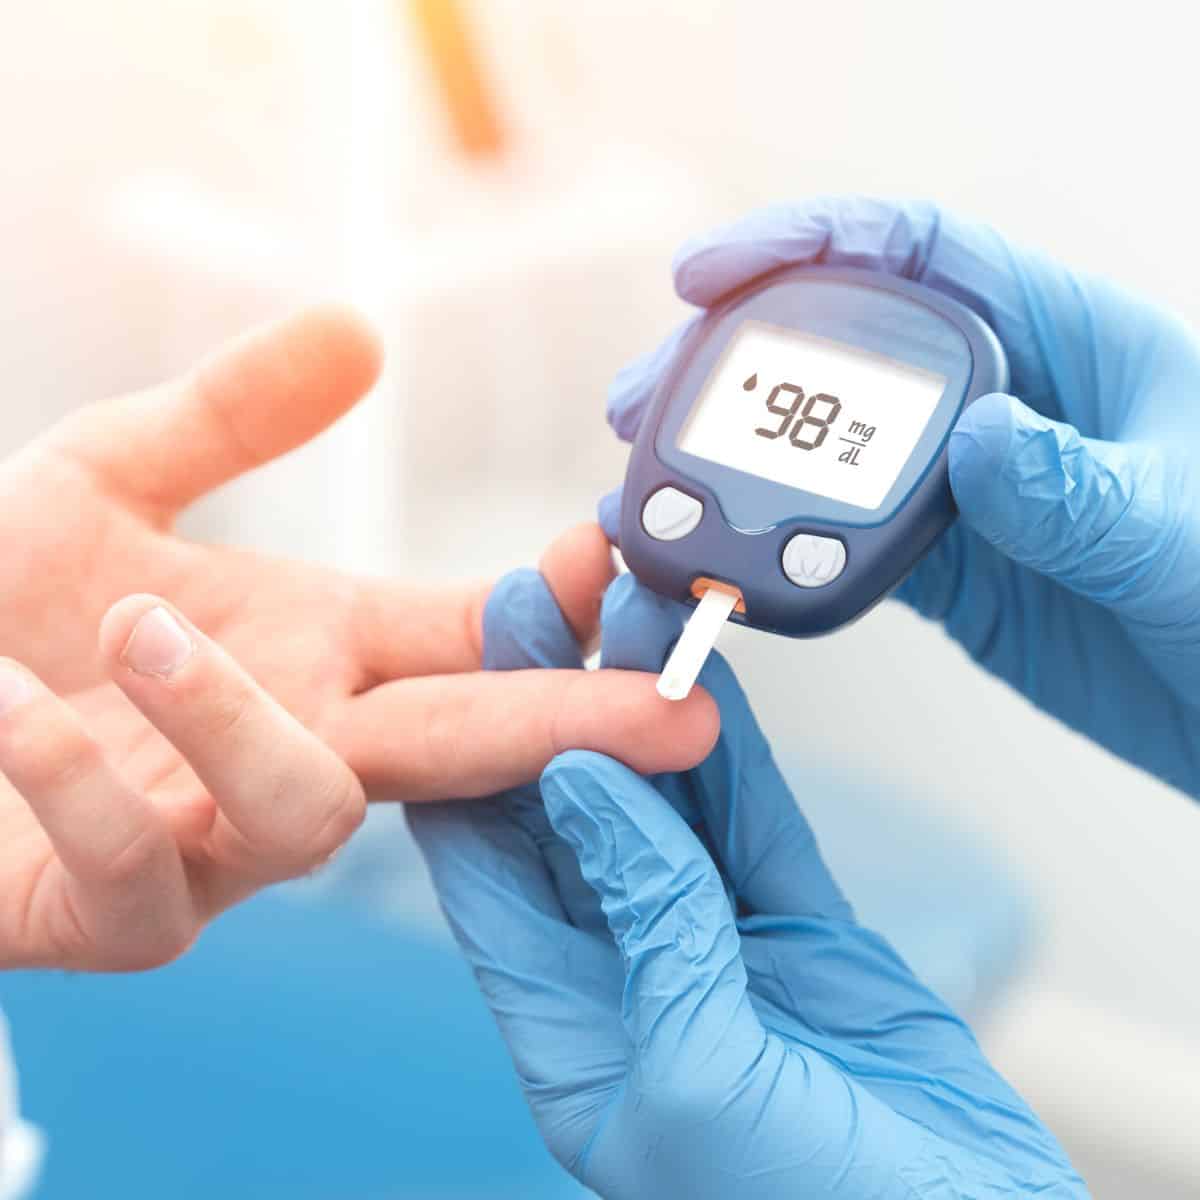 gloved hands using a blood glucose meter to check blood sugar